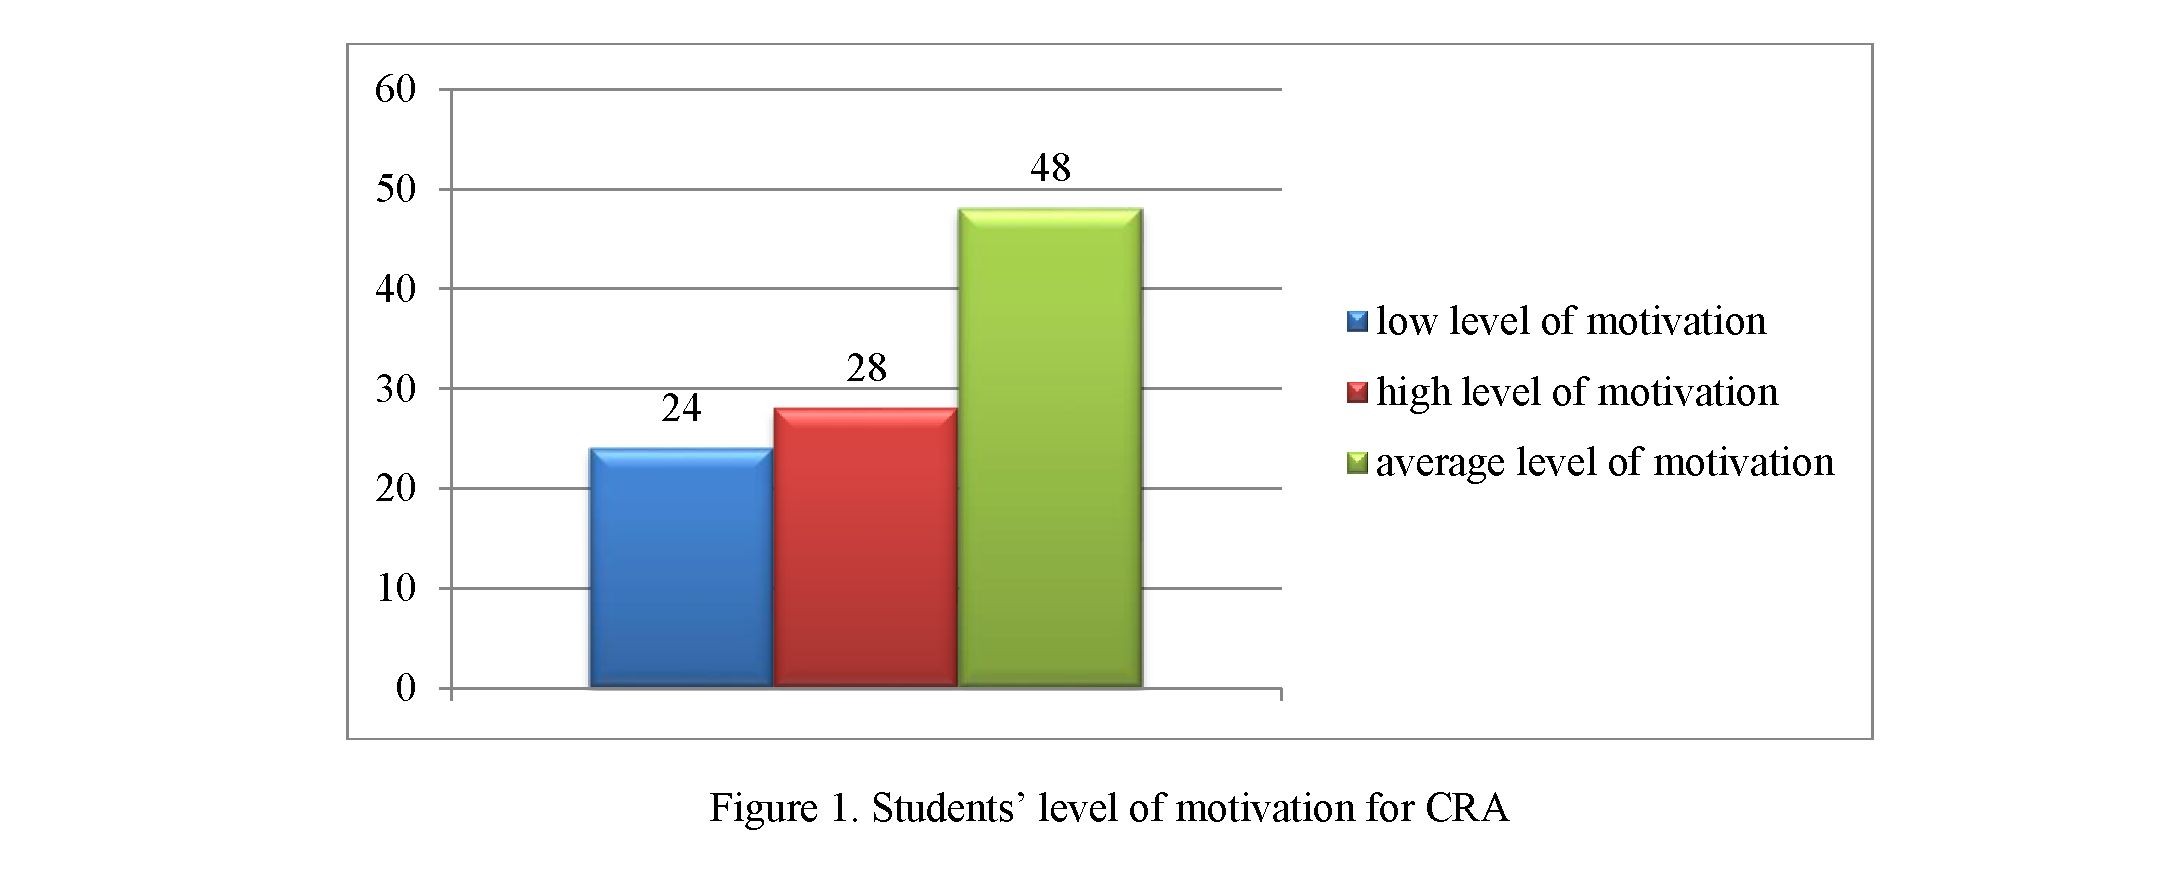 Development of the potential of research activities of students in a technical university